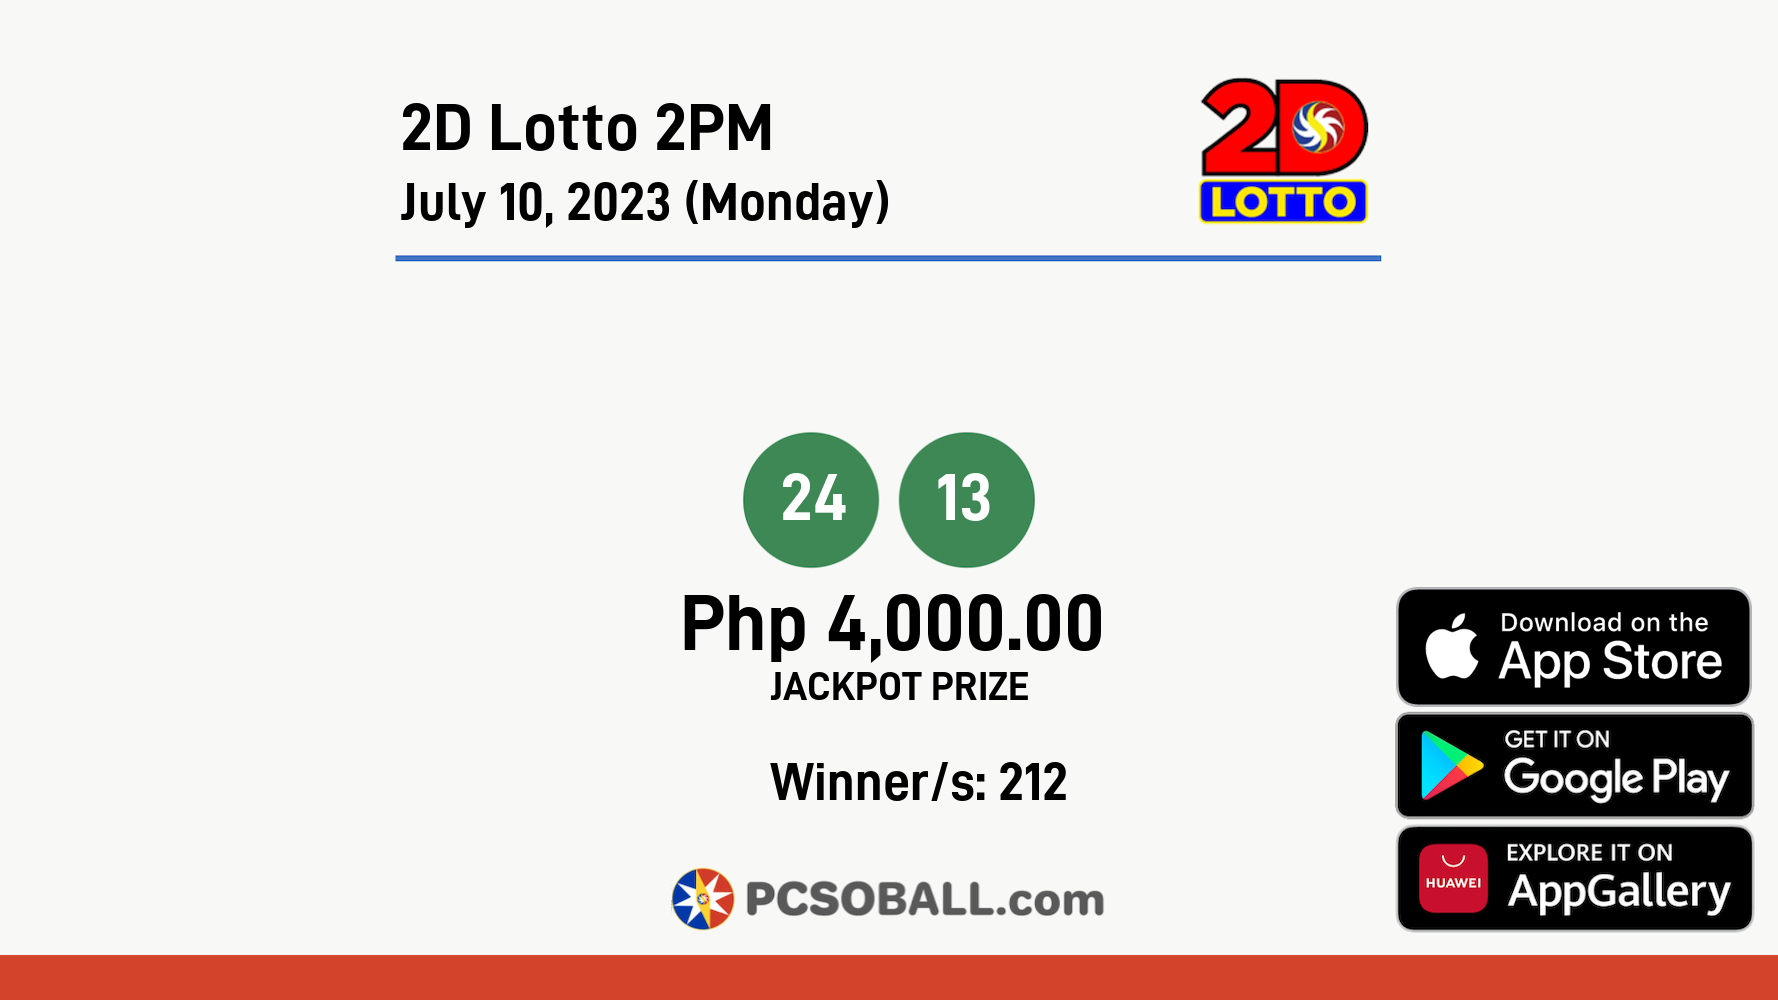 2D Lotto 2PM July 10, 2023 (Monday) Result